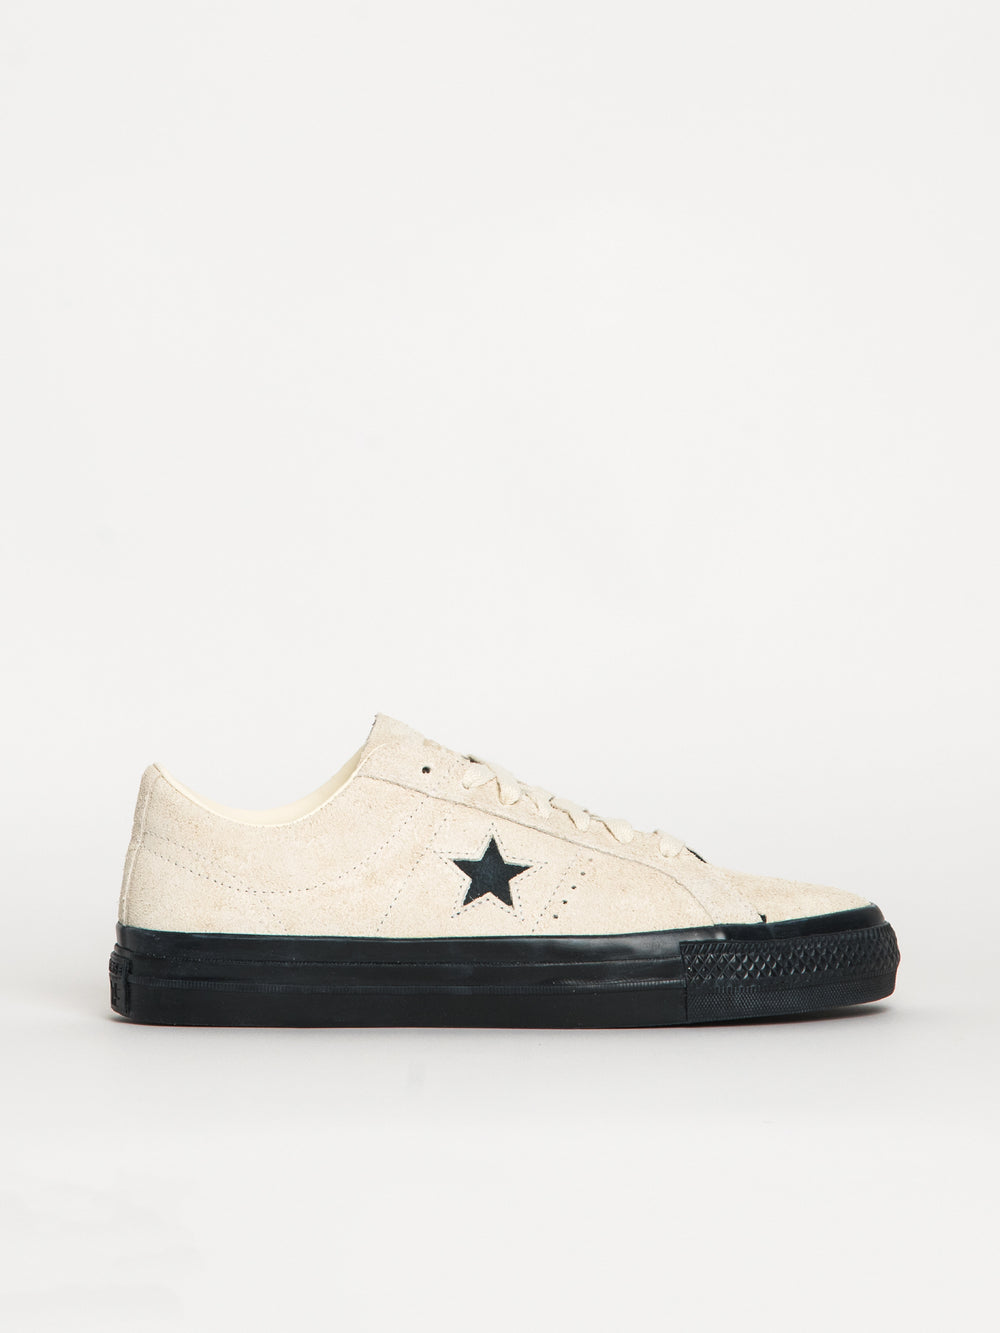 MENS CONVERSE ONE STAR PRO SHAGGY SUEDE | Boathouse Footwear